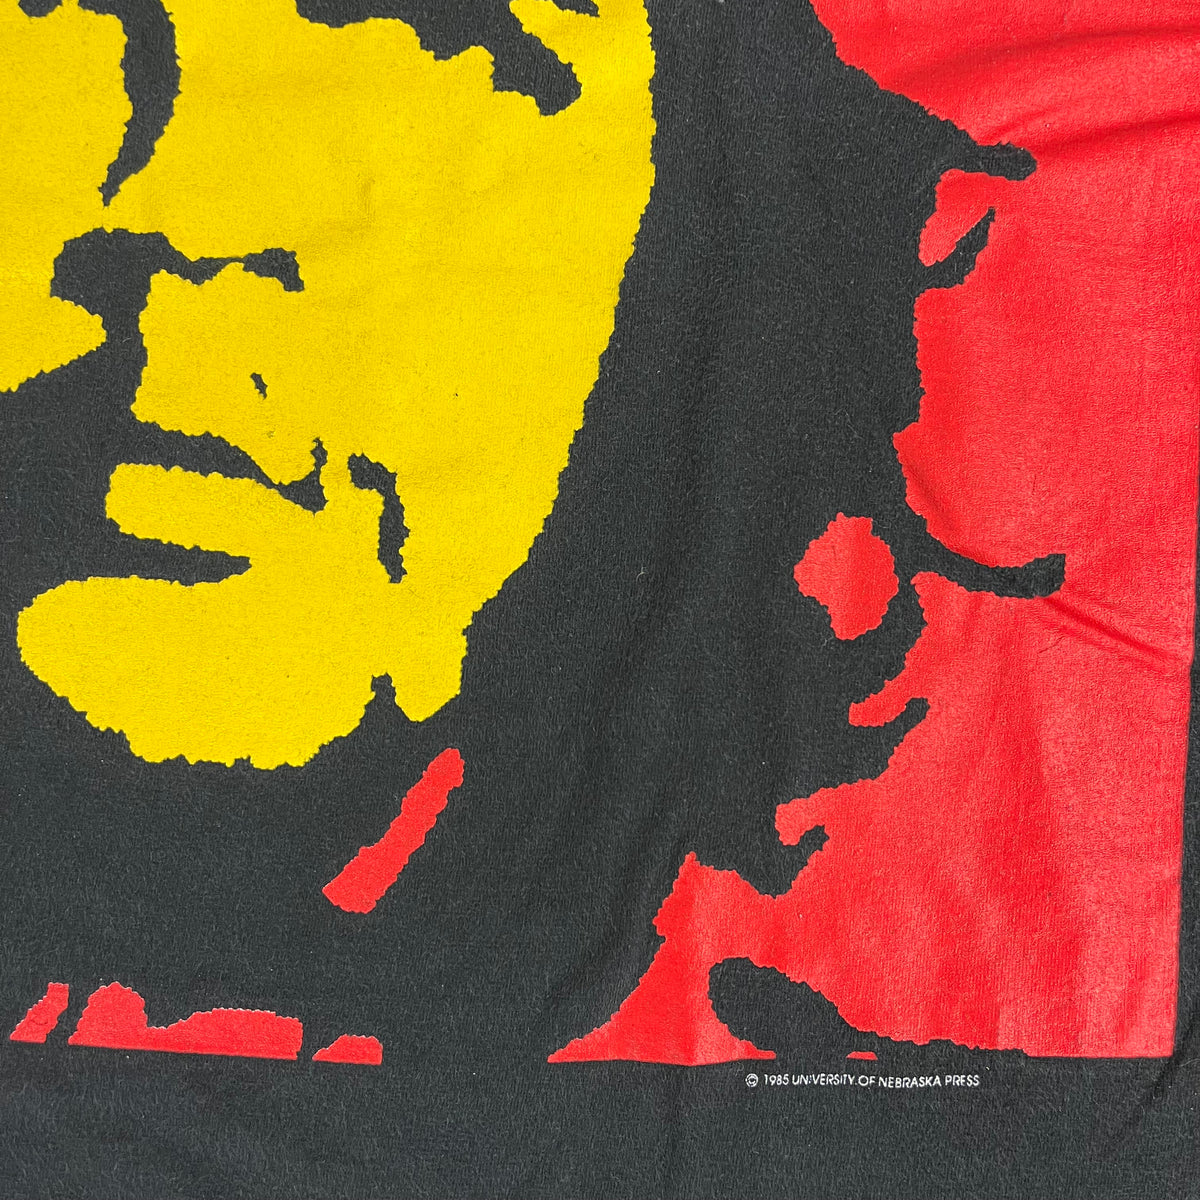 A red T-shirt with the portrait of Che Guevara for sale on a booth